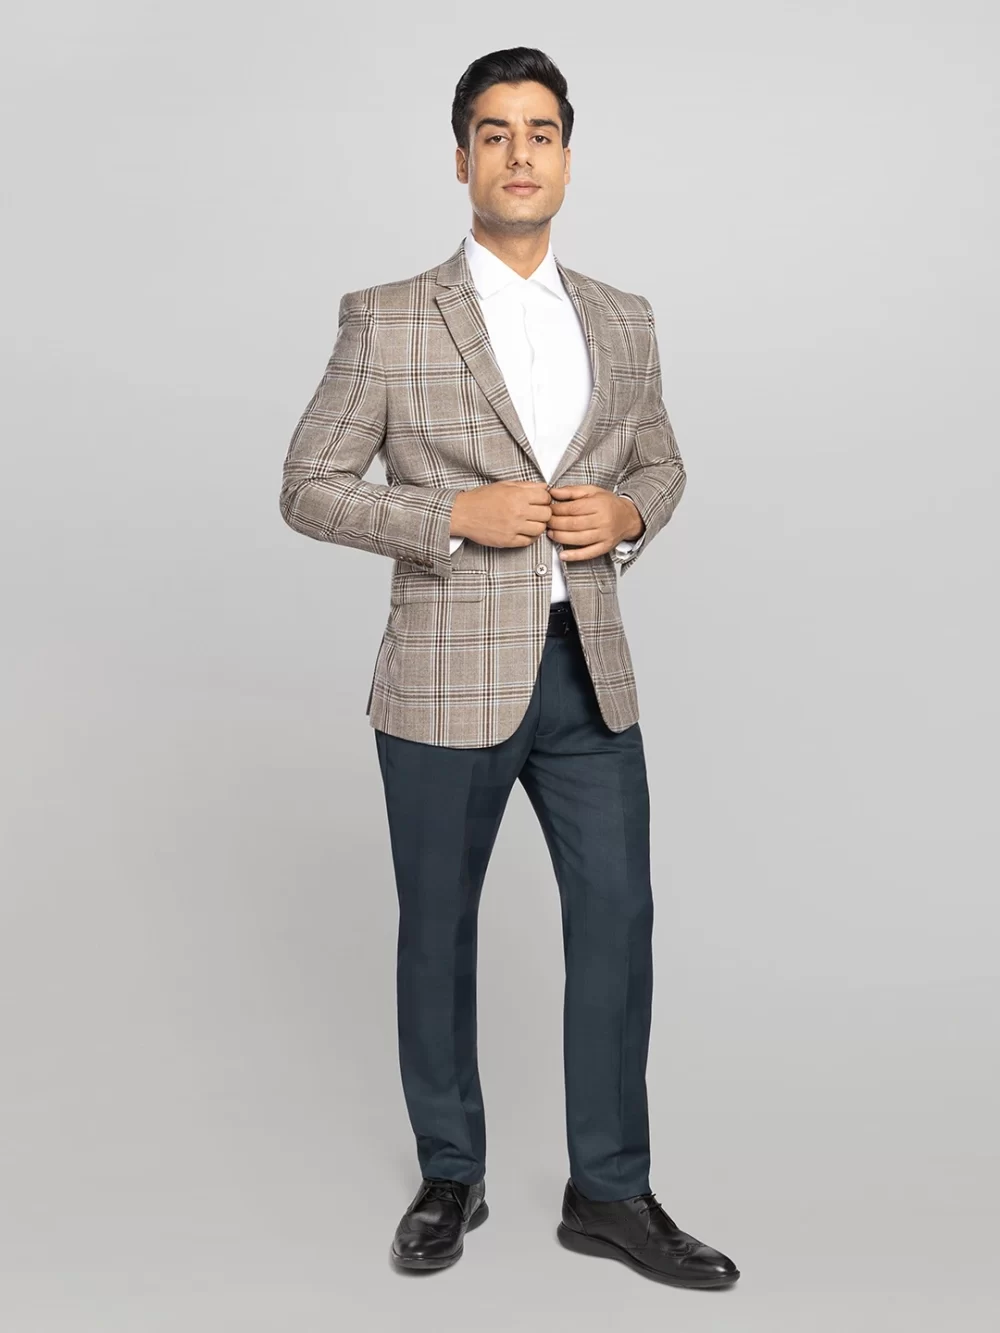 P N RAO Men's Checkered Jacket with Notch Lapel - Beige